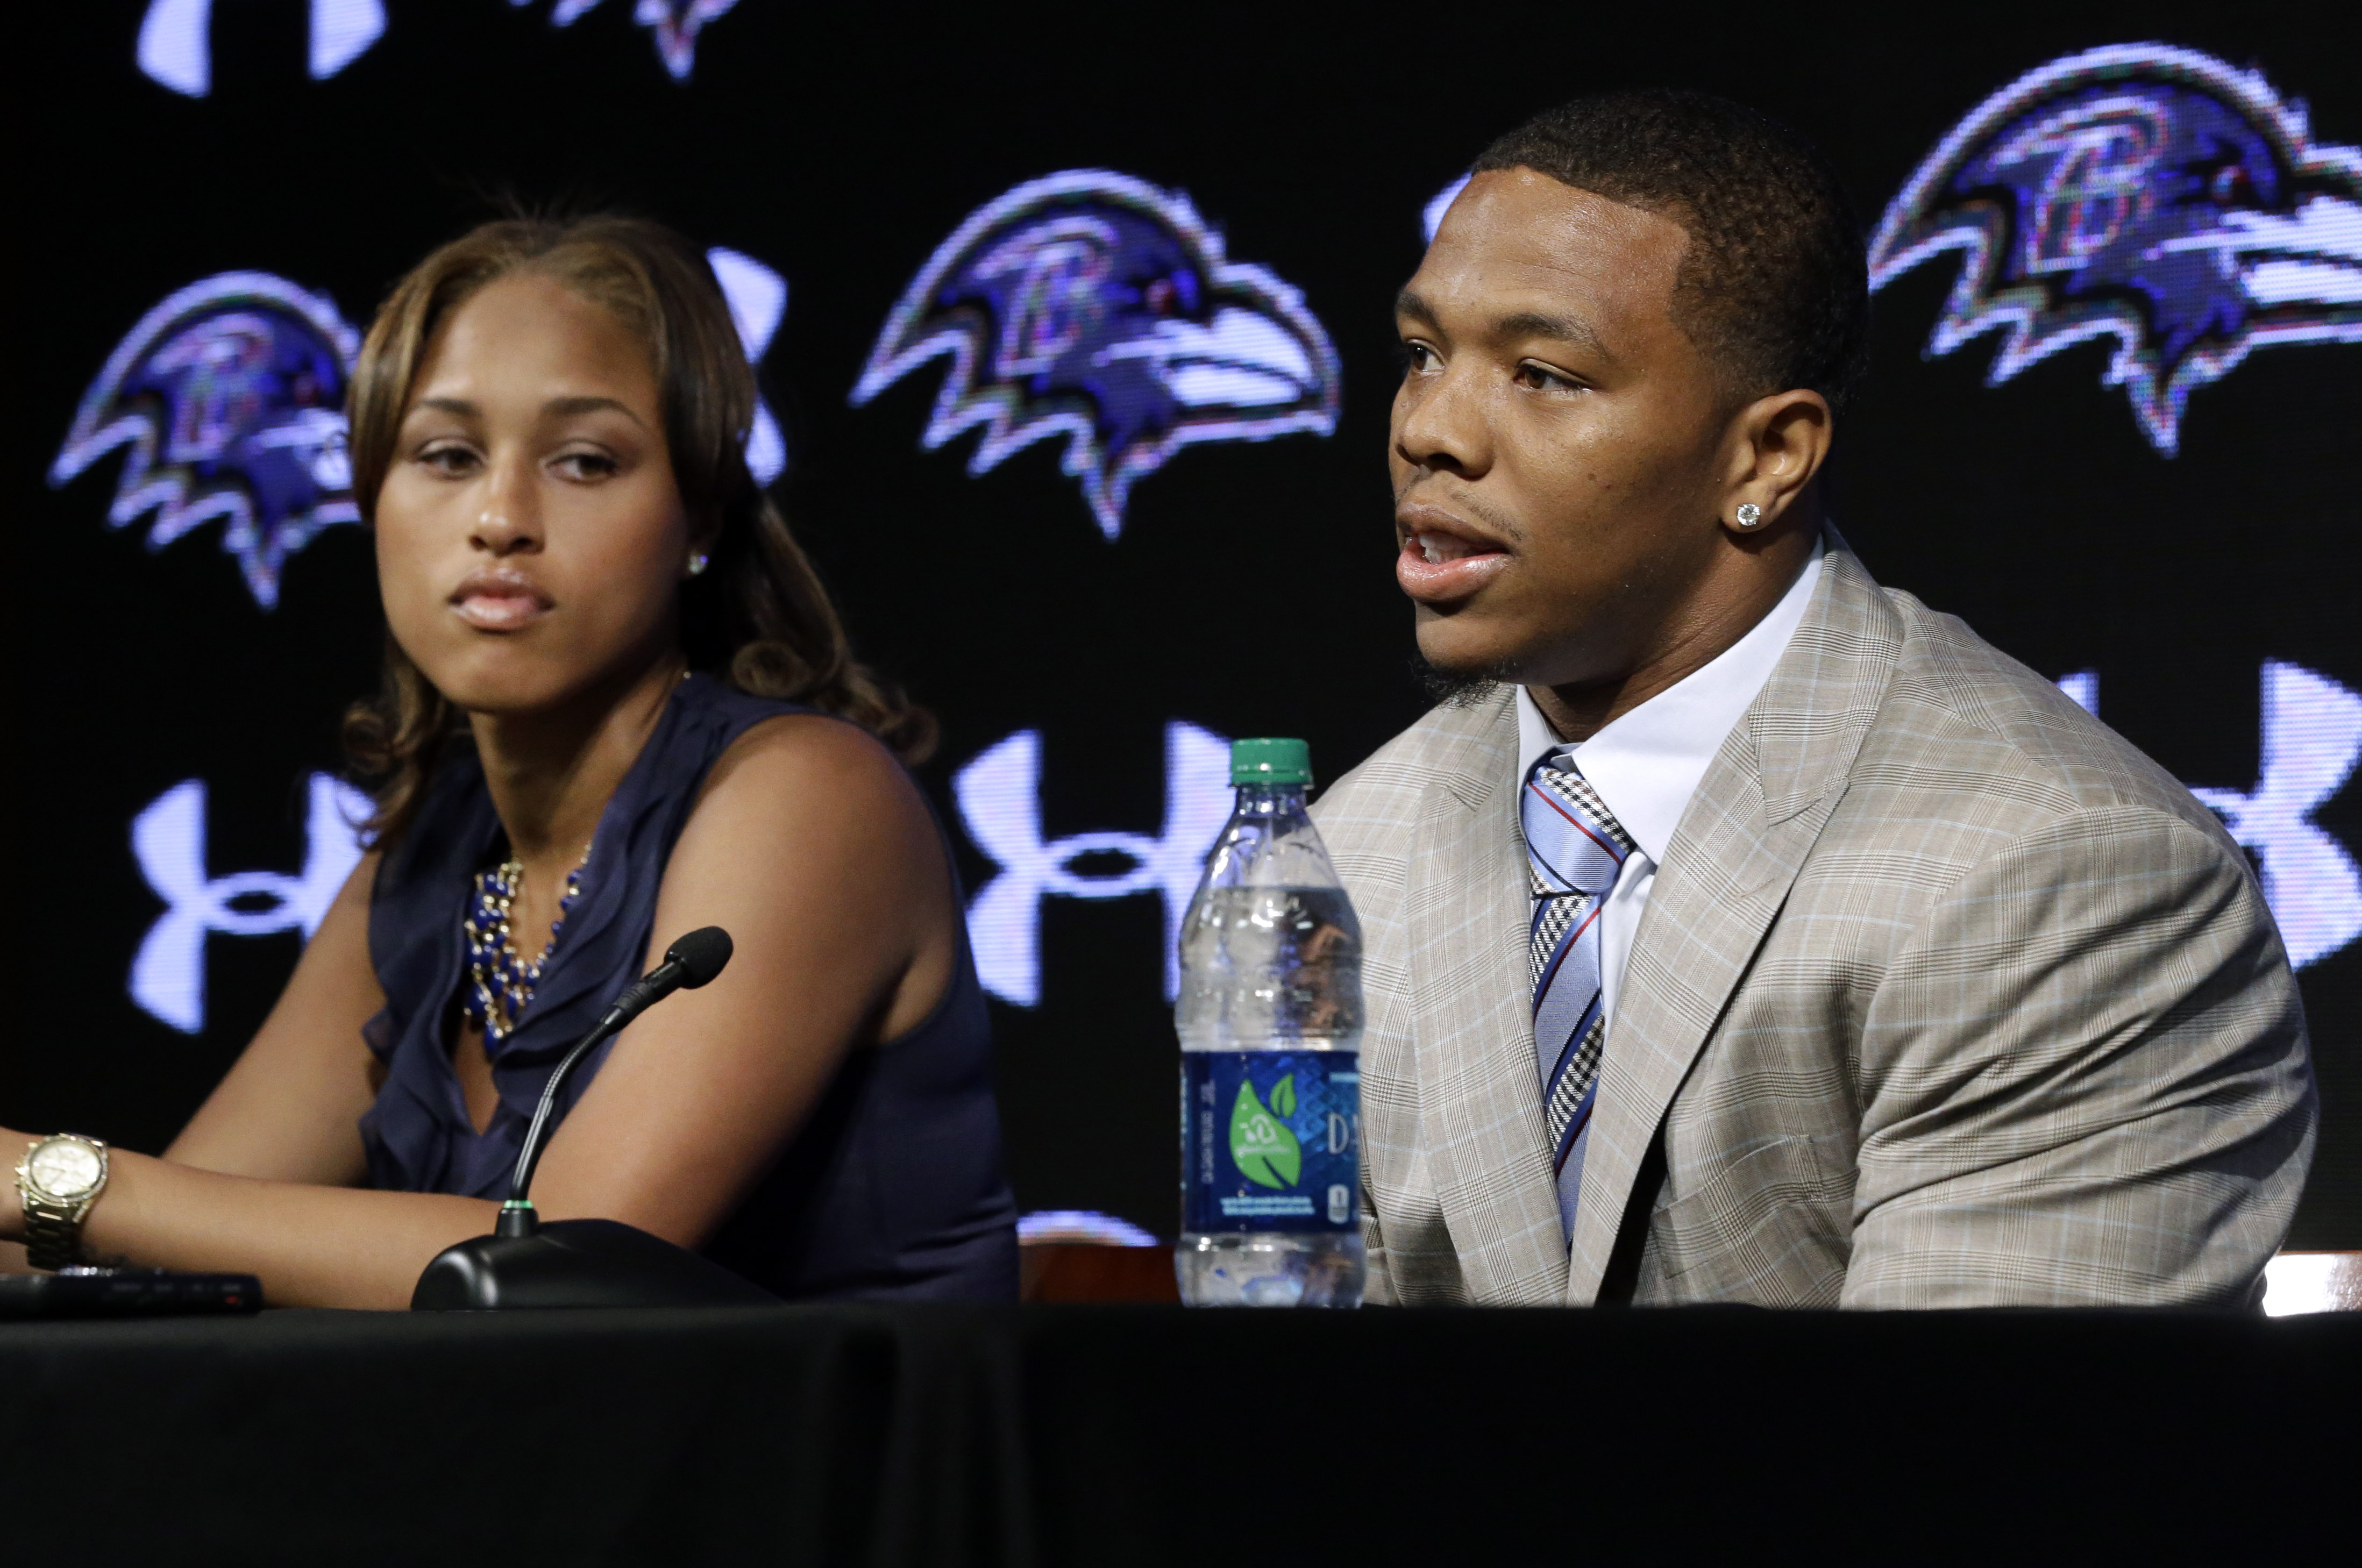 Baltimore Ravens running back Ray Rice speaks alongside his wife Janay during a news conference at the team's practice facility in Owings Mills, Md on May 23, 2014. (Patrick Semansky—AP)